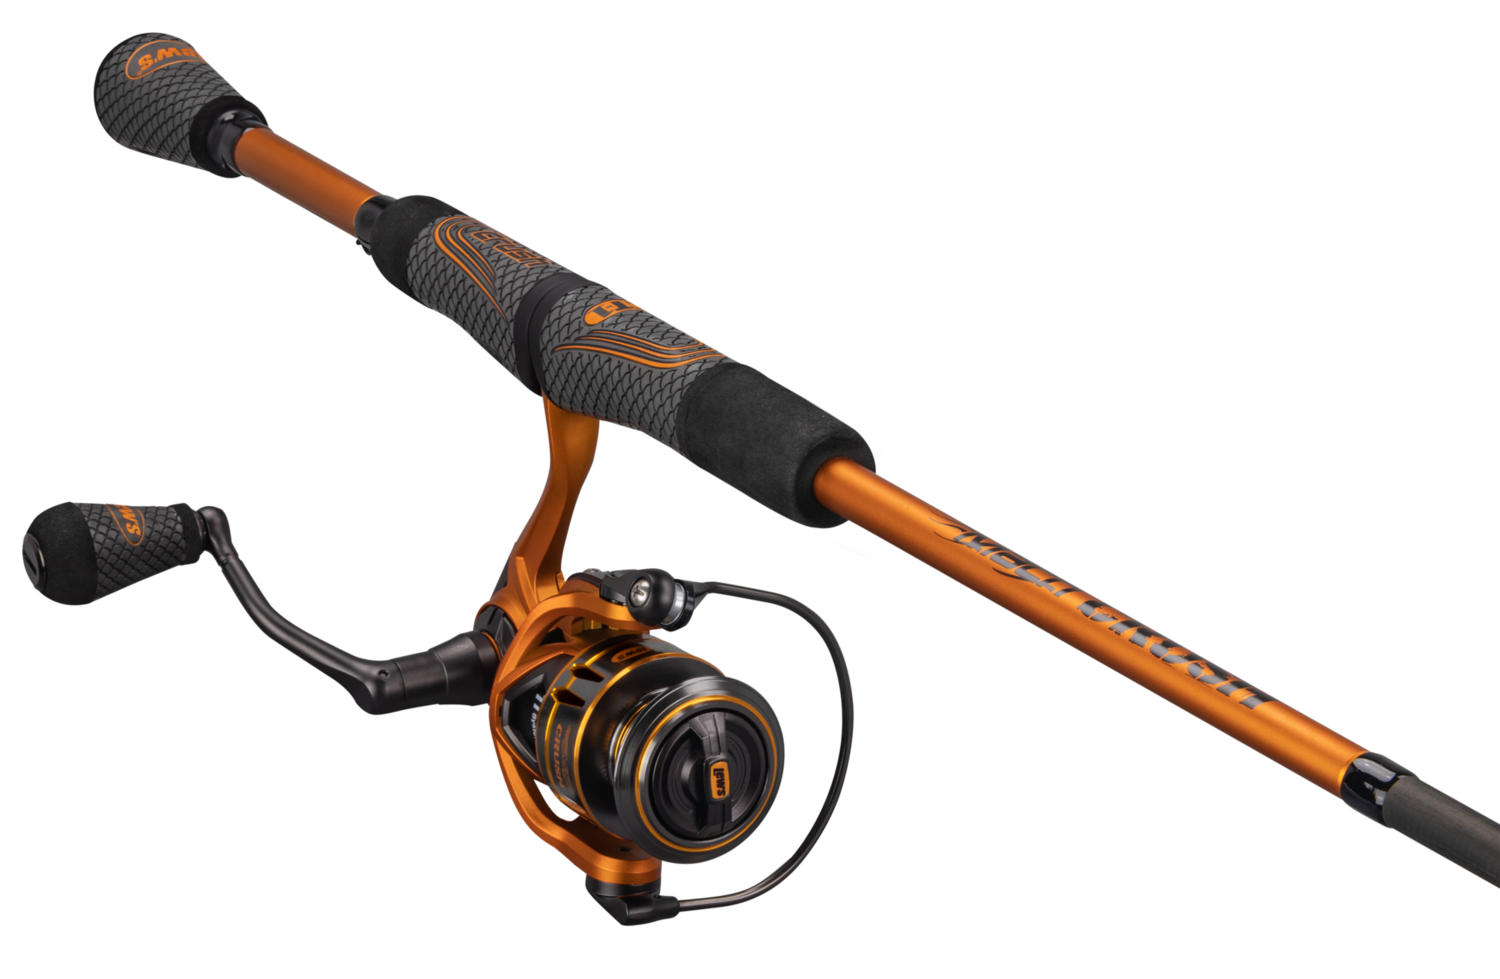 Lew's Mach Crush Spinning Combo